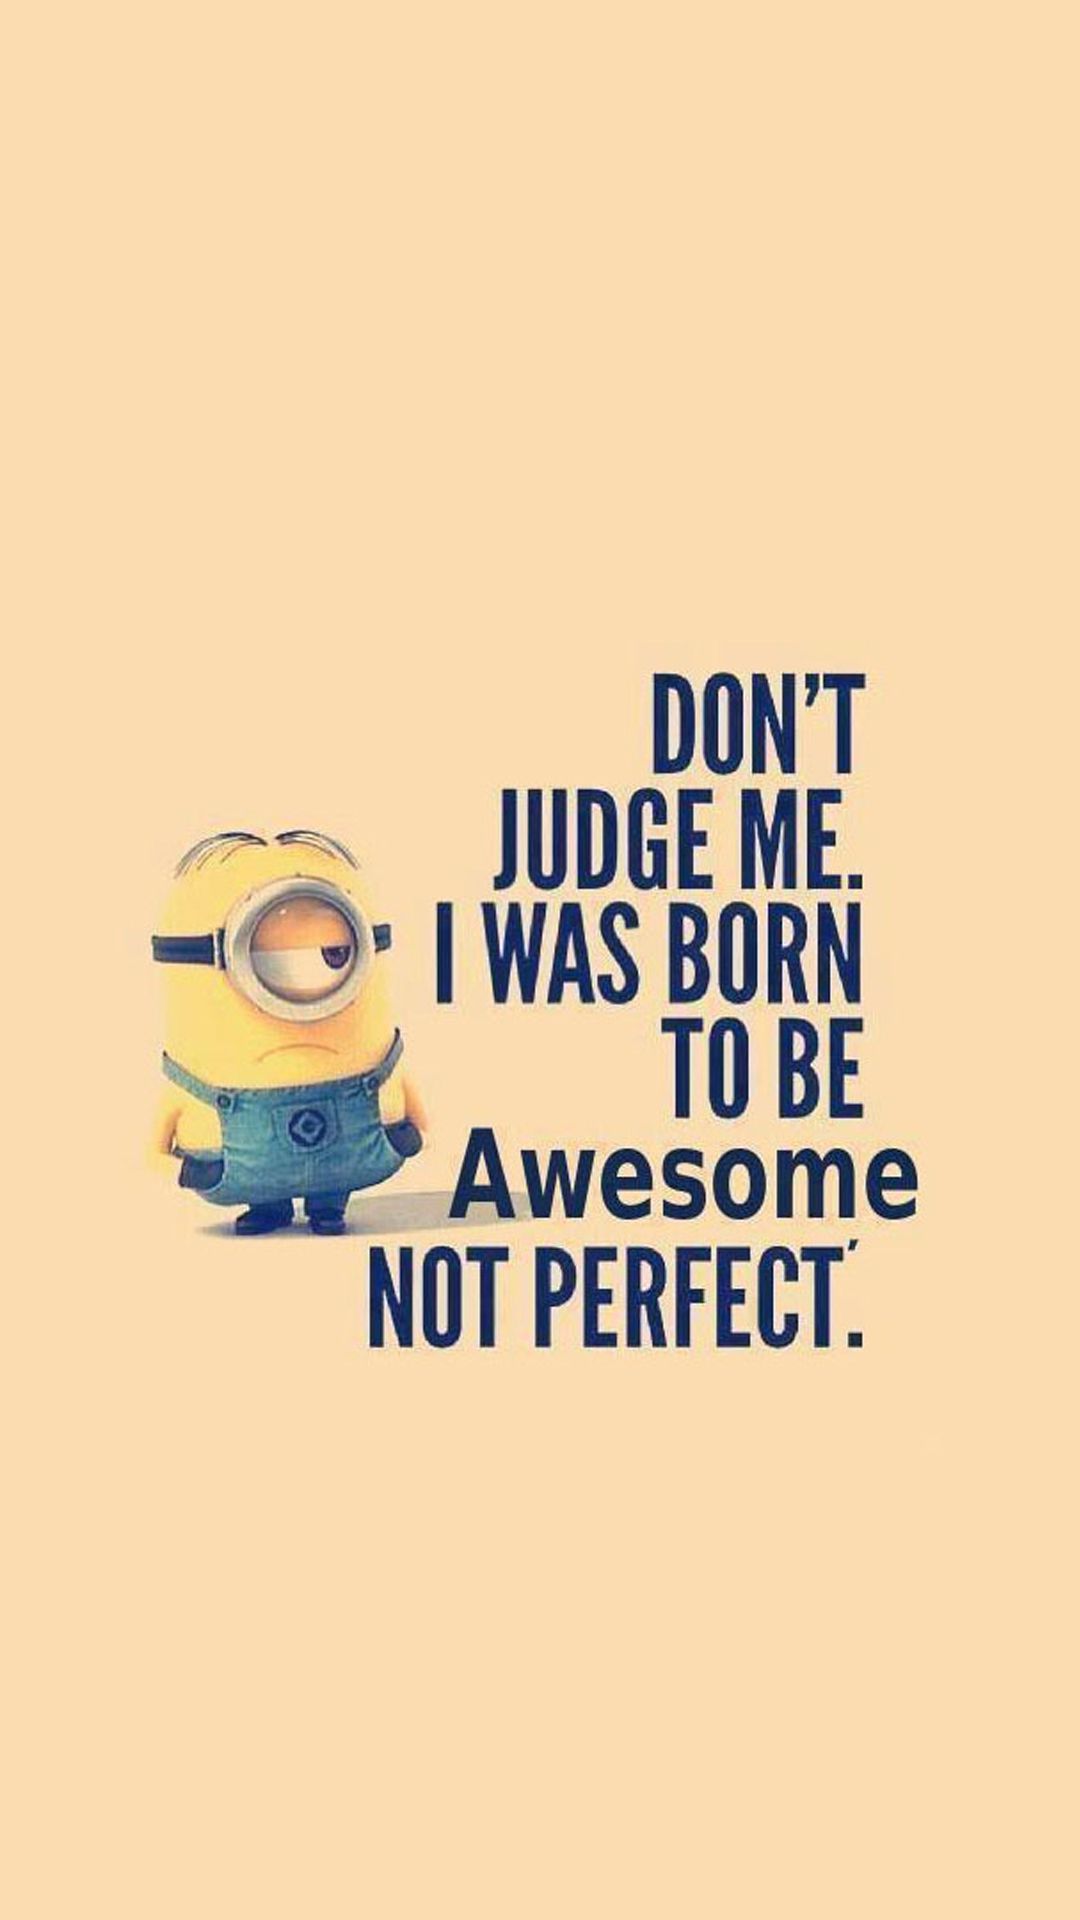 Typography iPhone Wallpaper Download For Free. Funny iphone wallpaper, Funny minion quotes, Minions quotes